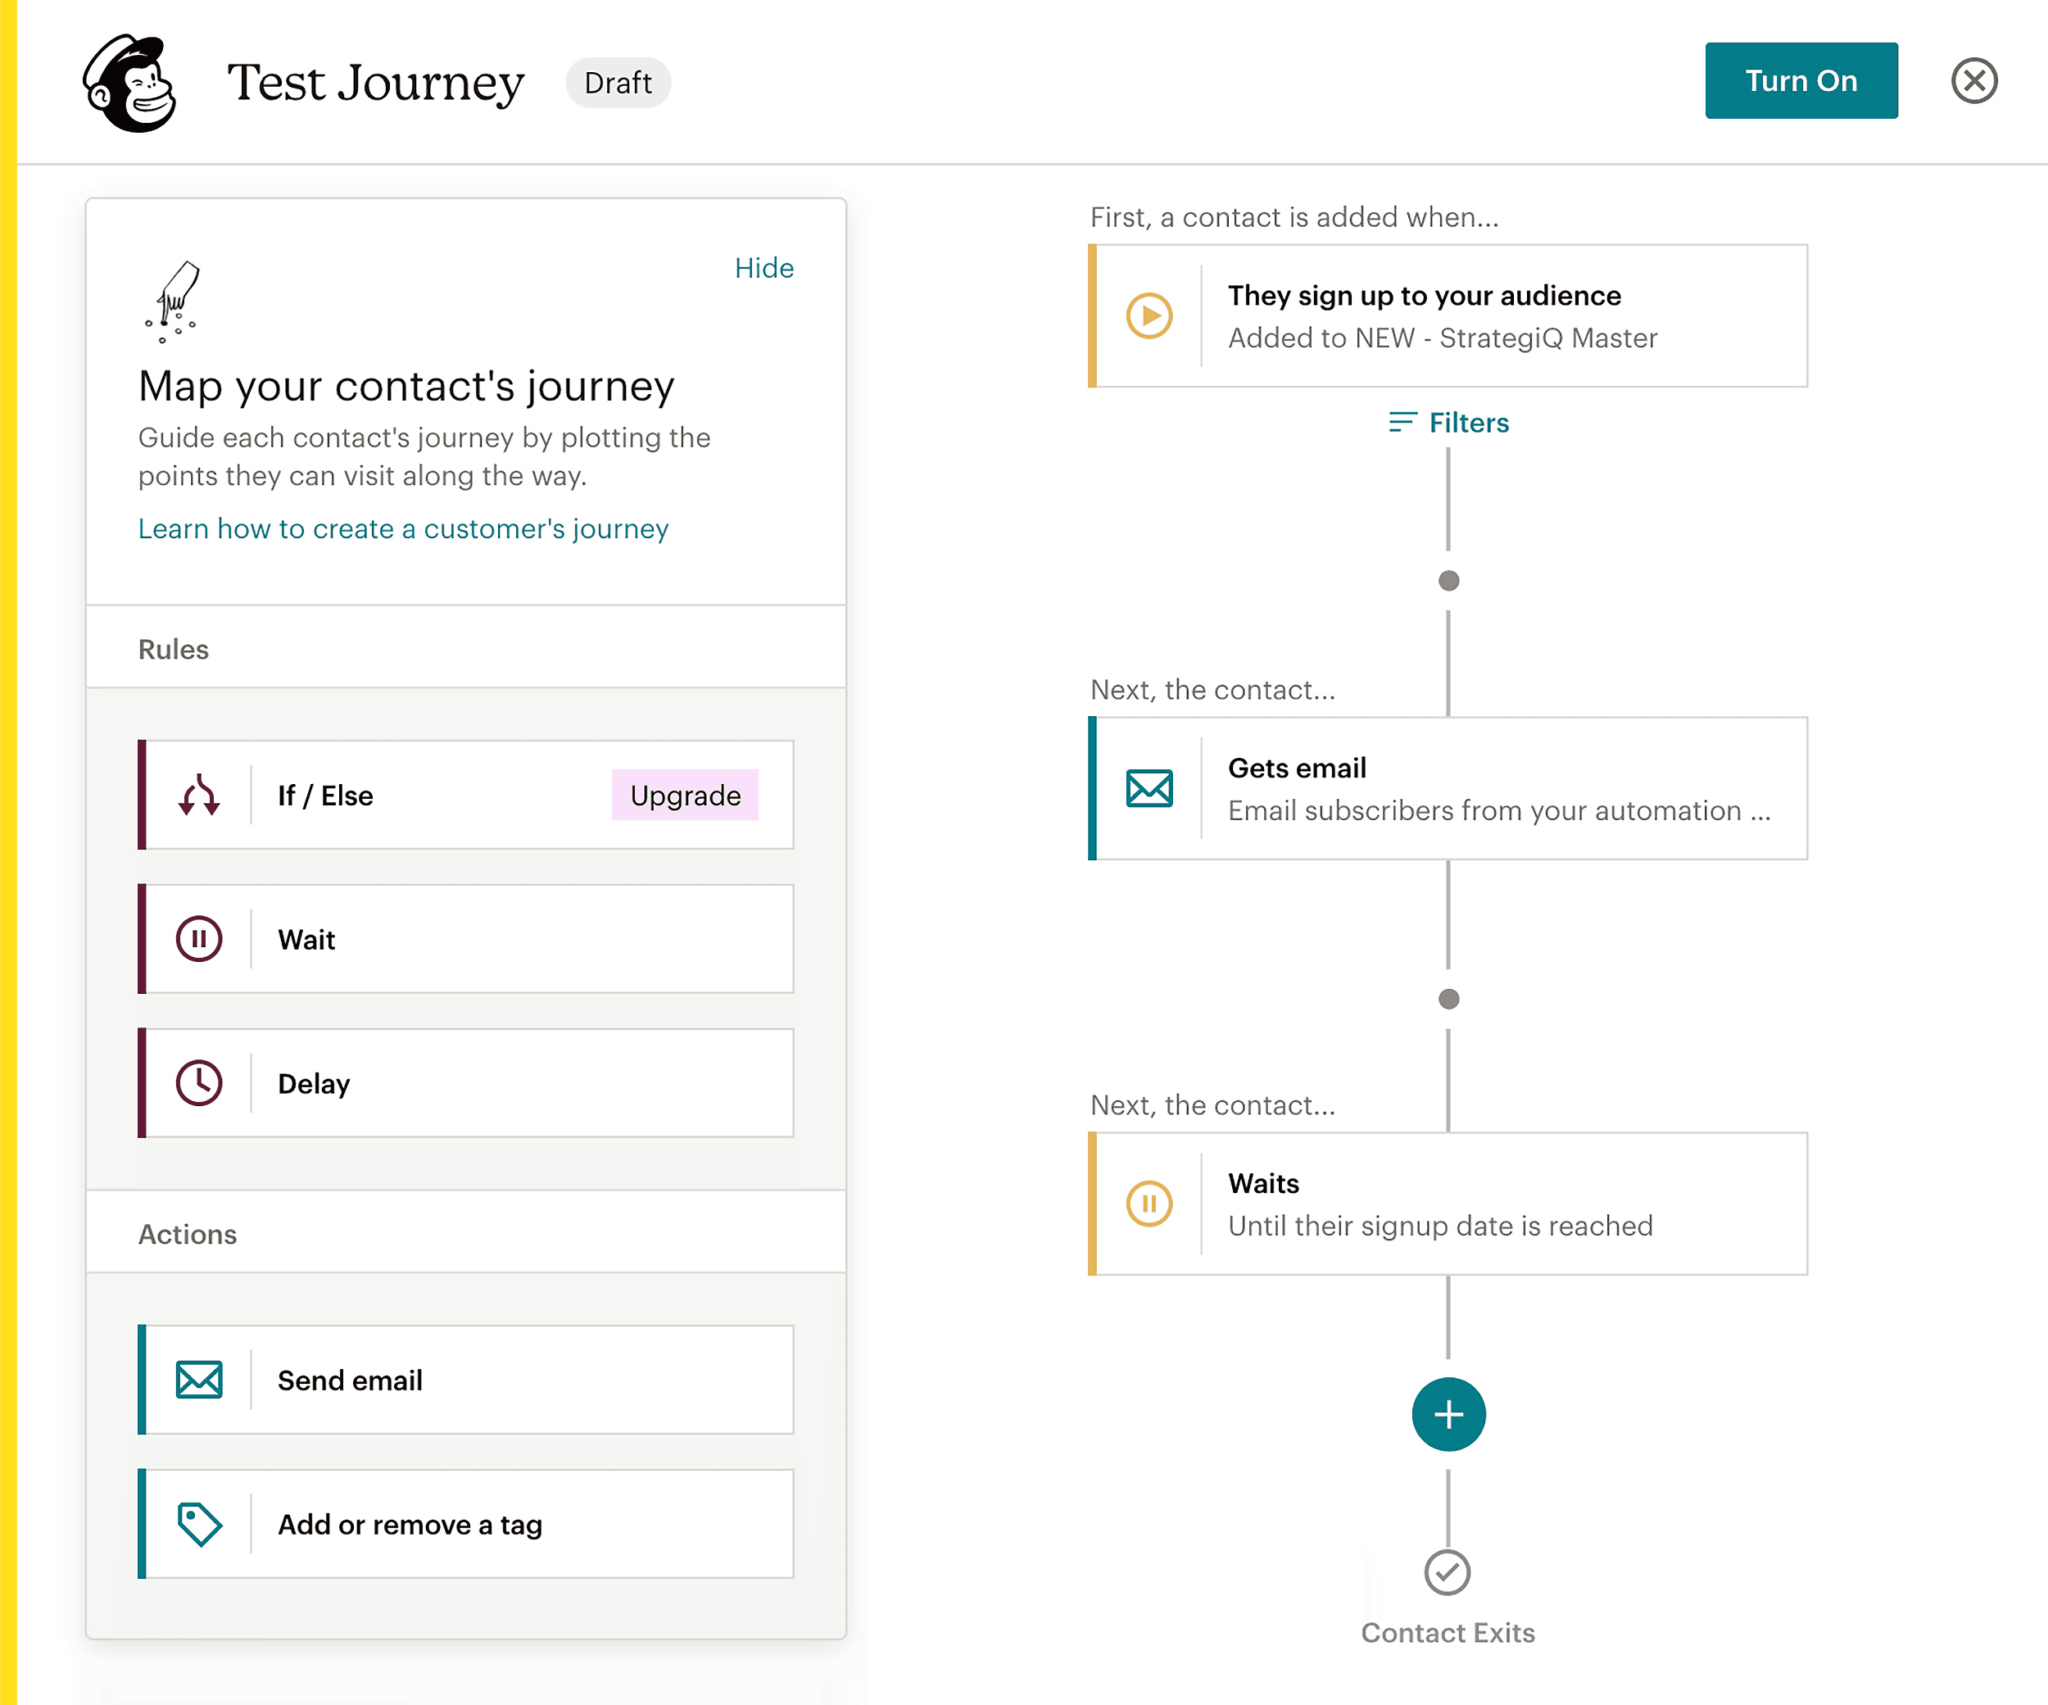 mailchimp-customer-journey-map 29 Top Digital Marketing Tools for Every Budget